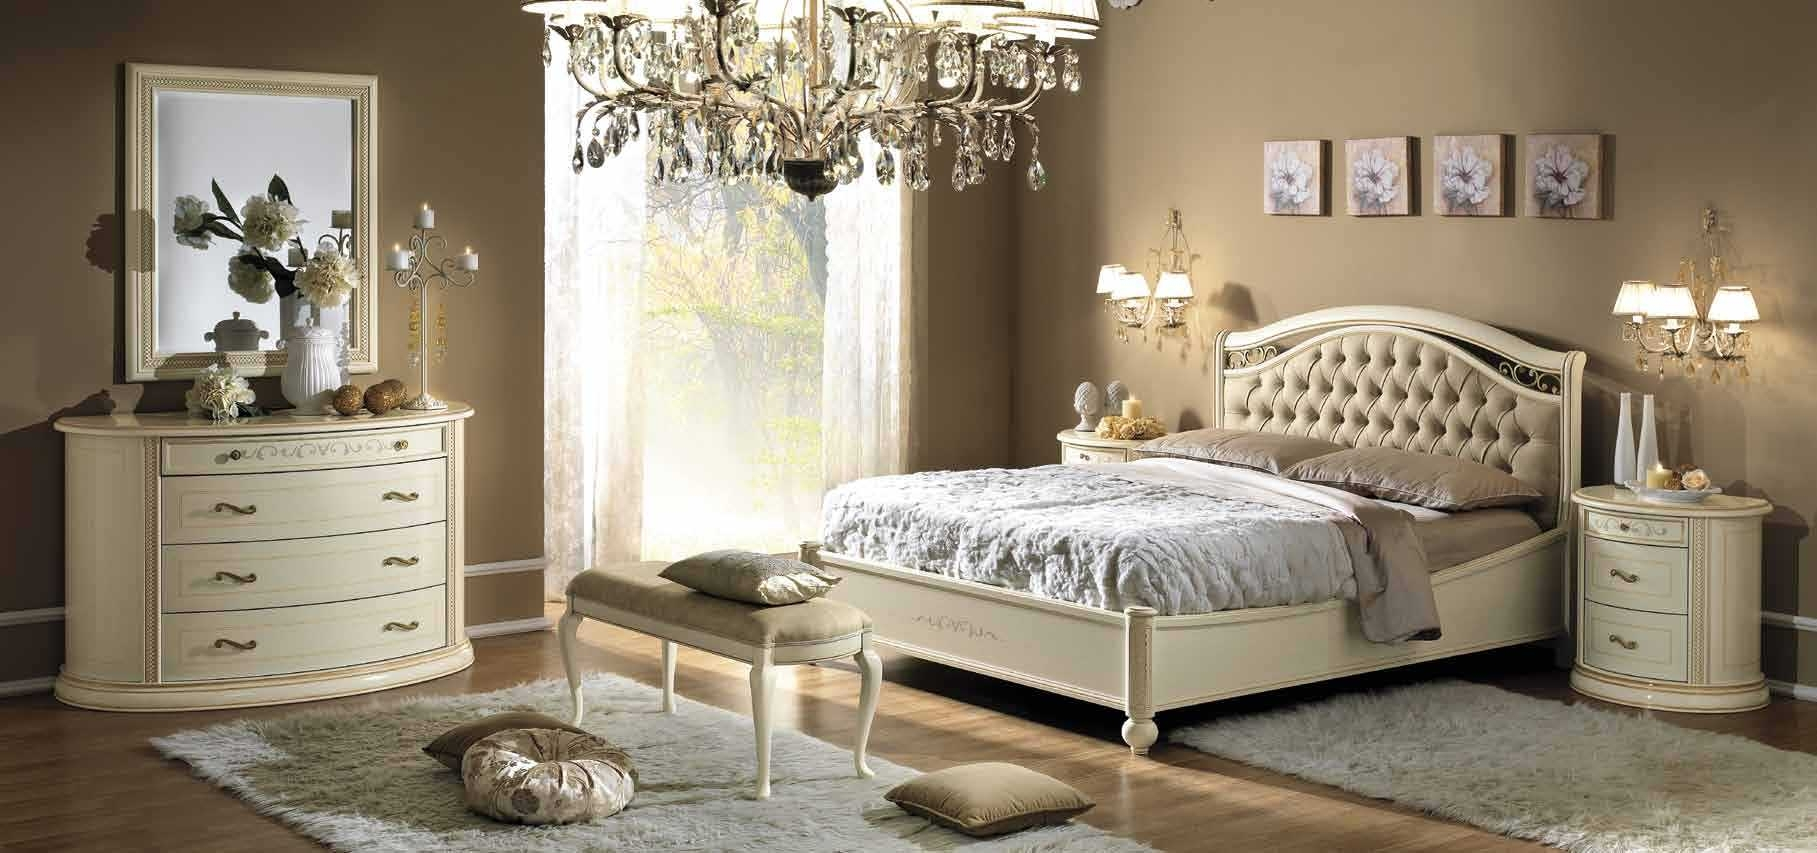 Walnut And Cream Bedroom Furniture Cileather Home Design Ideas for measurements 1817 X 853